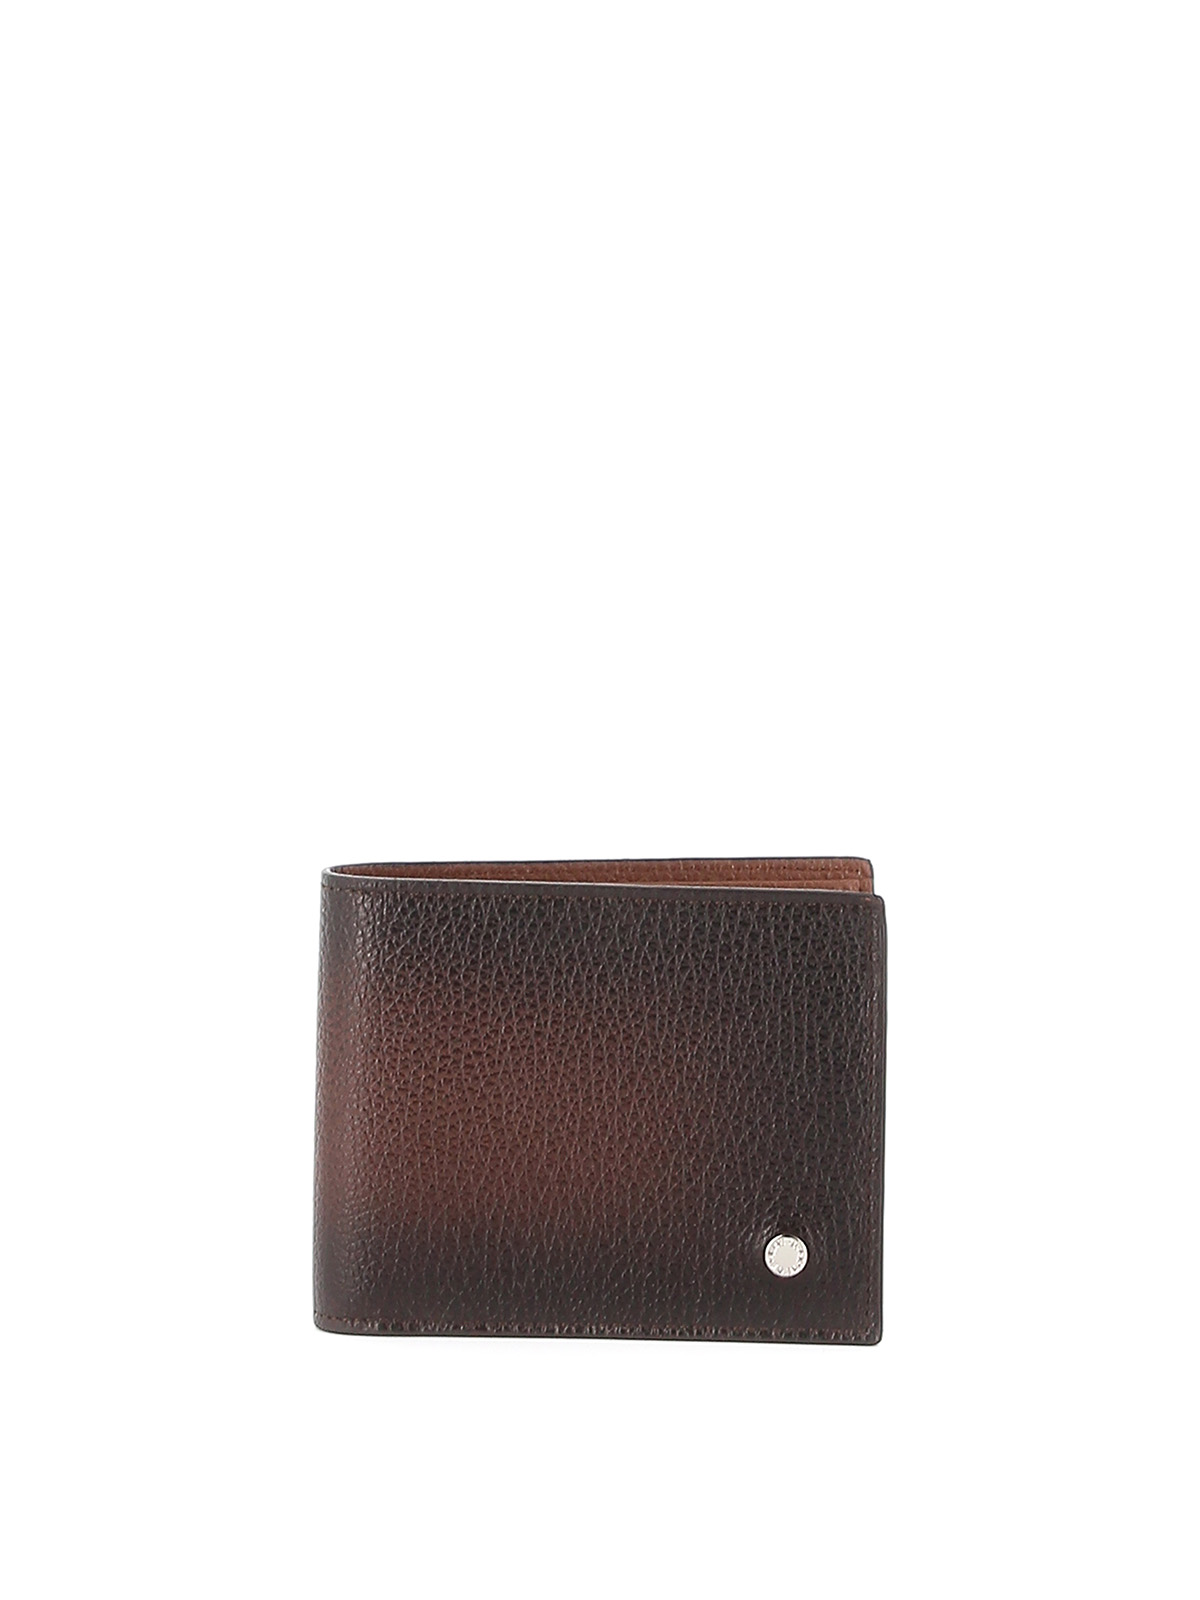 Orciani Gradient Grainy Leather Bifold Wallet In Brown